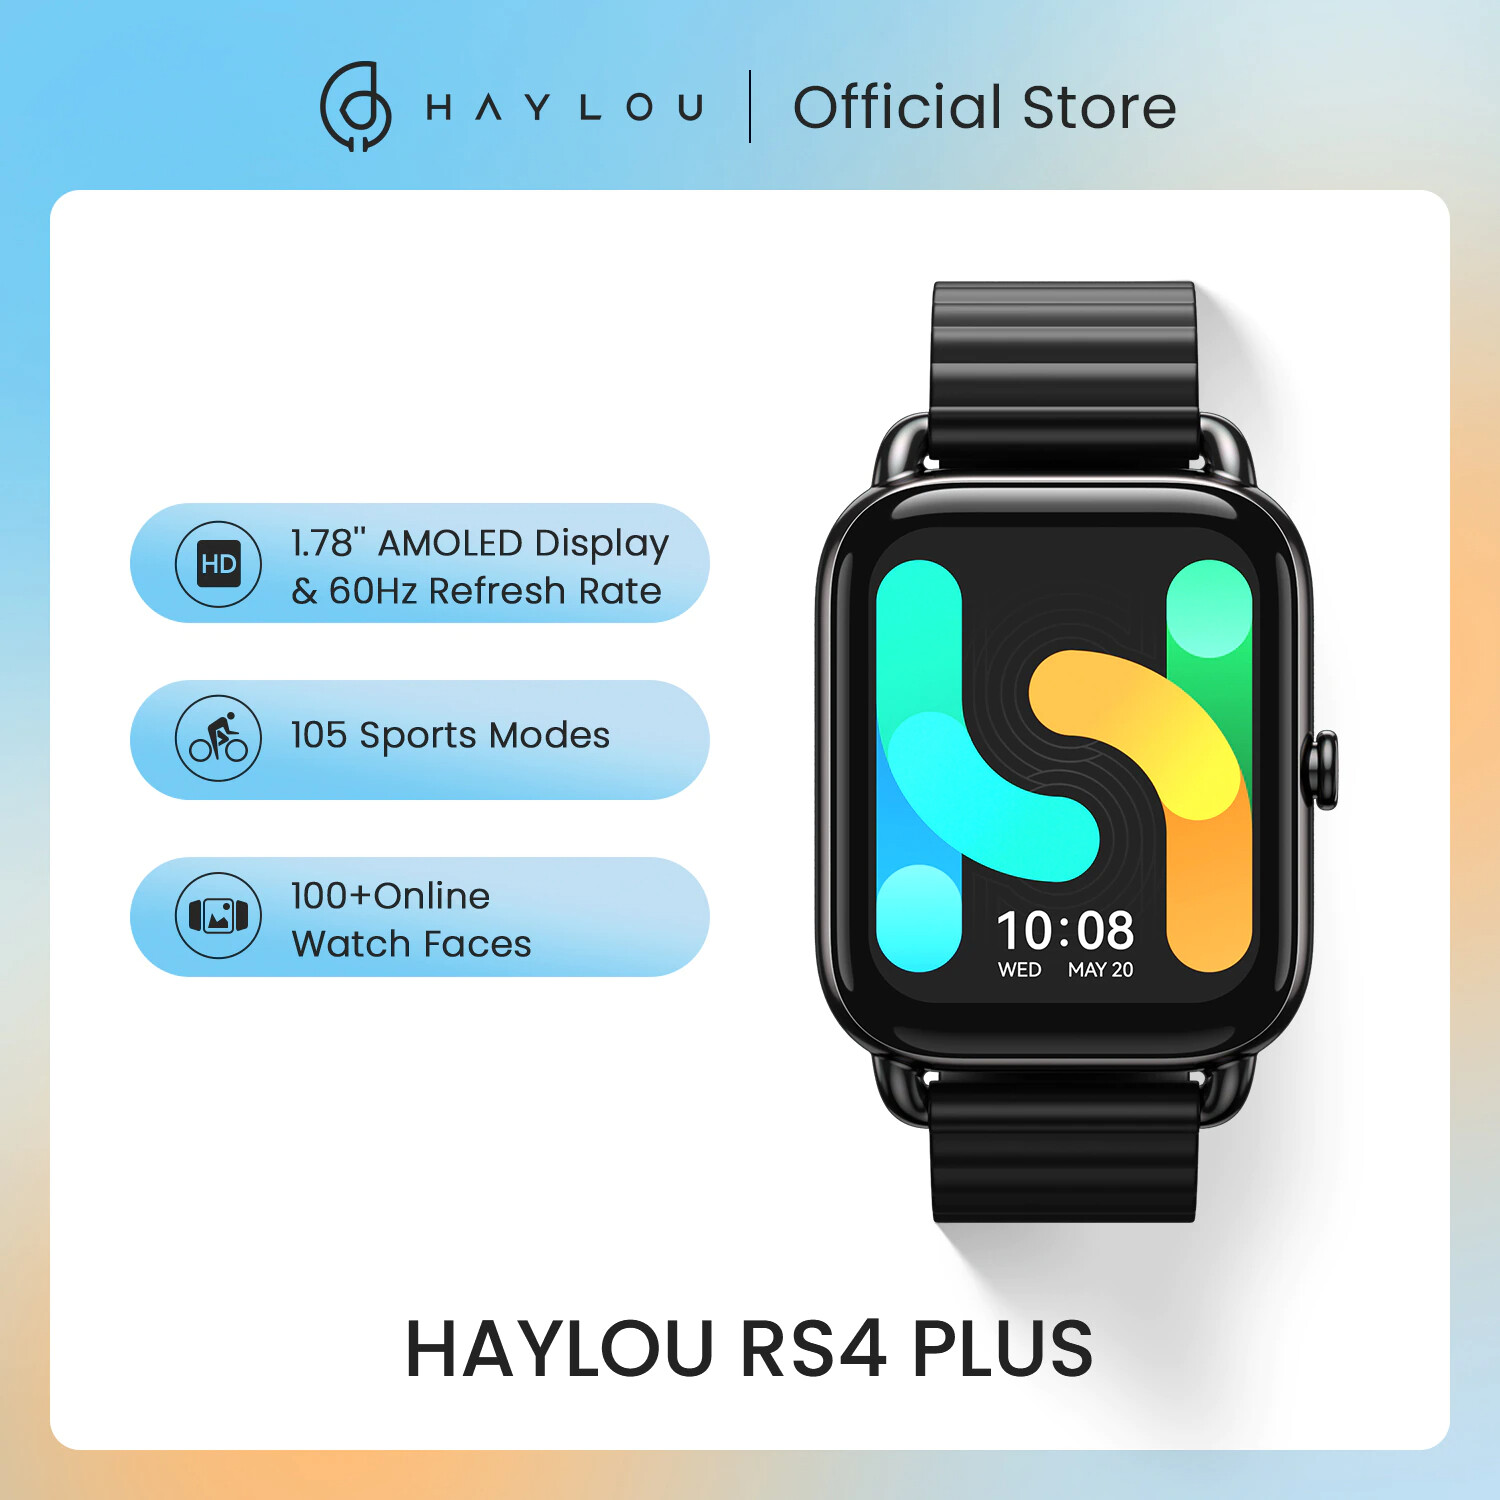 HAYLOU RS4 Plus